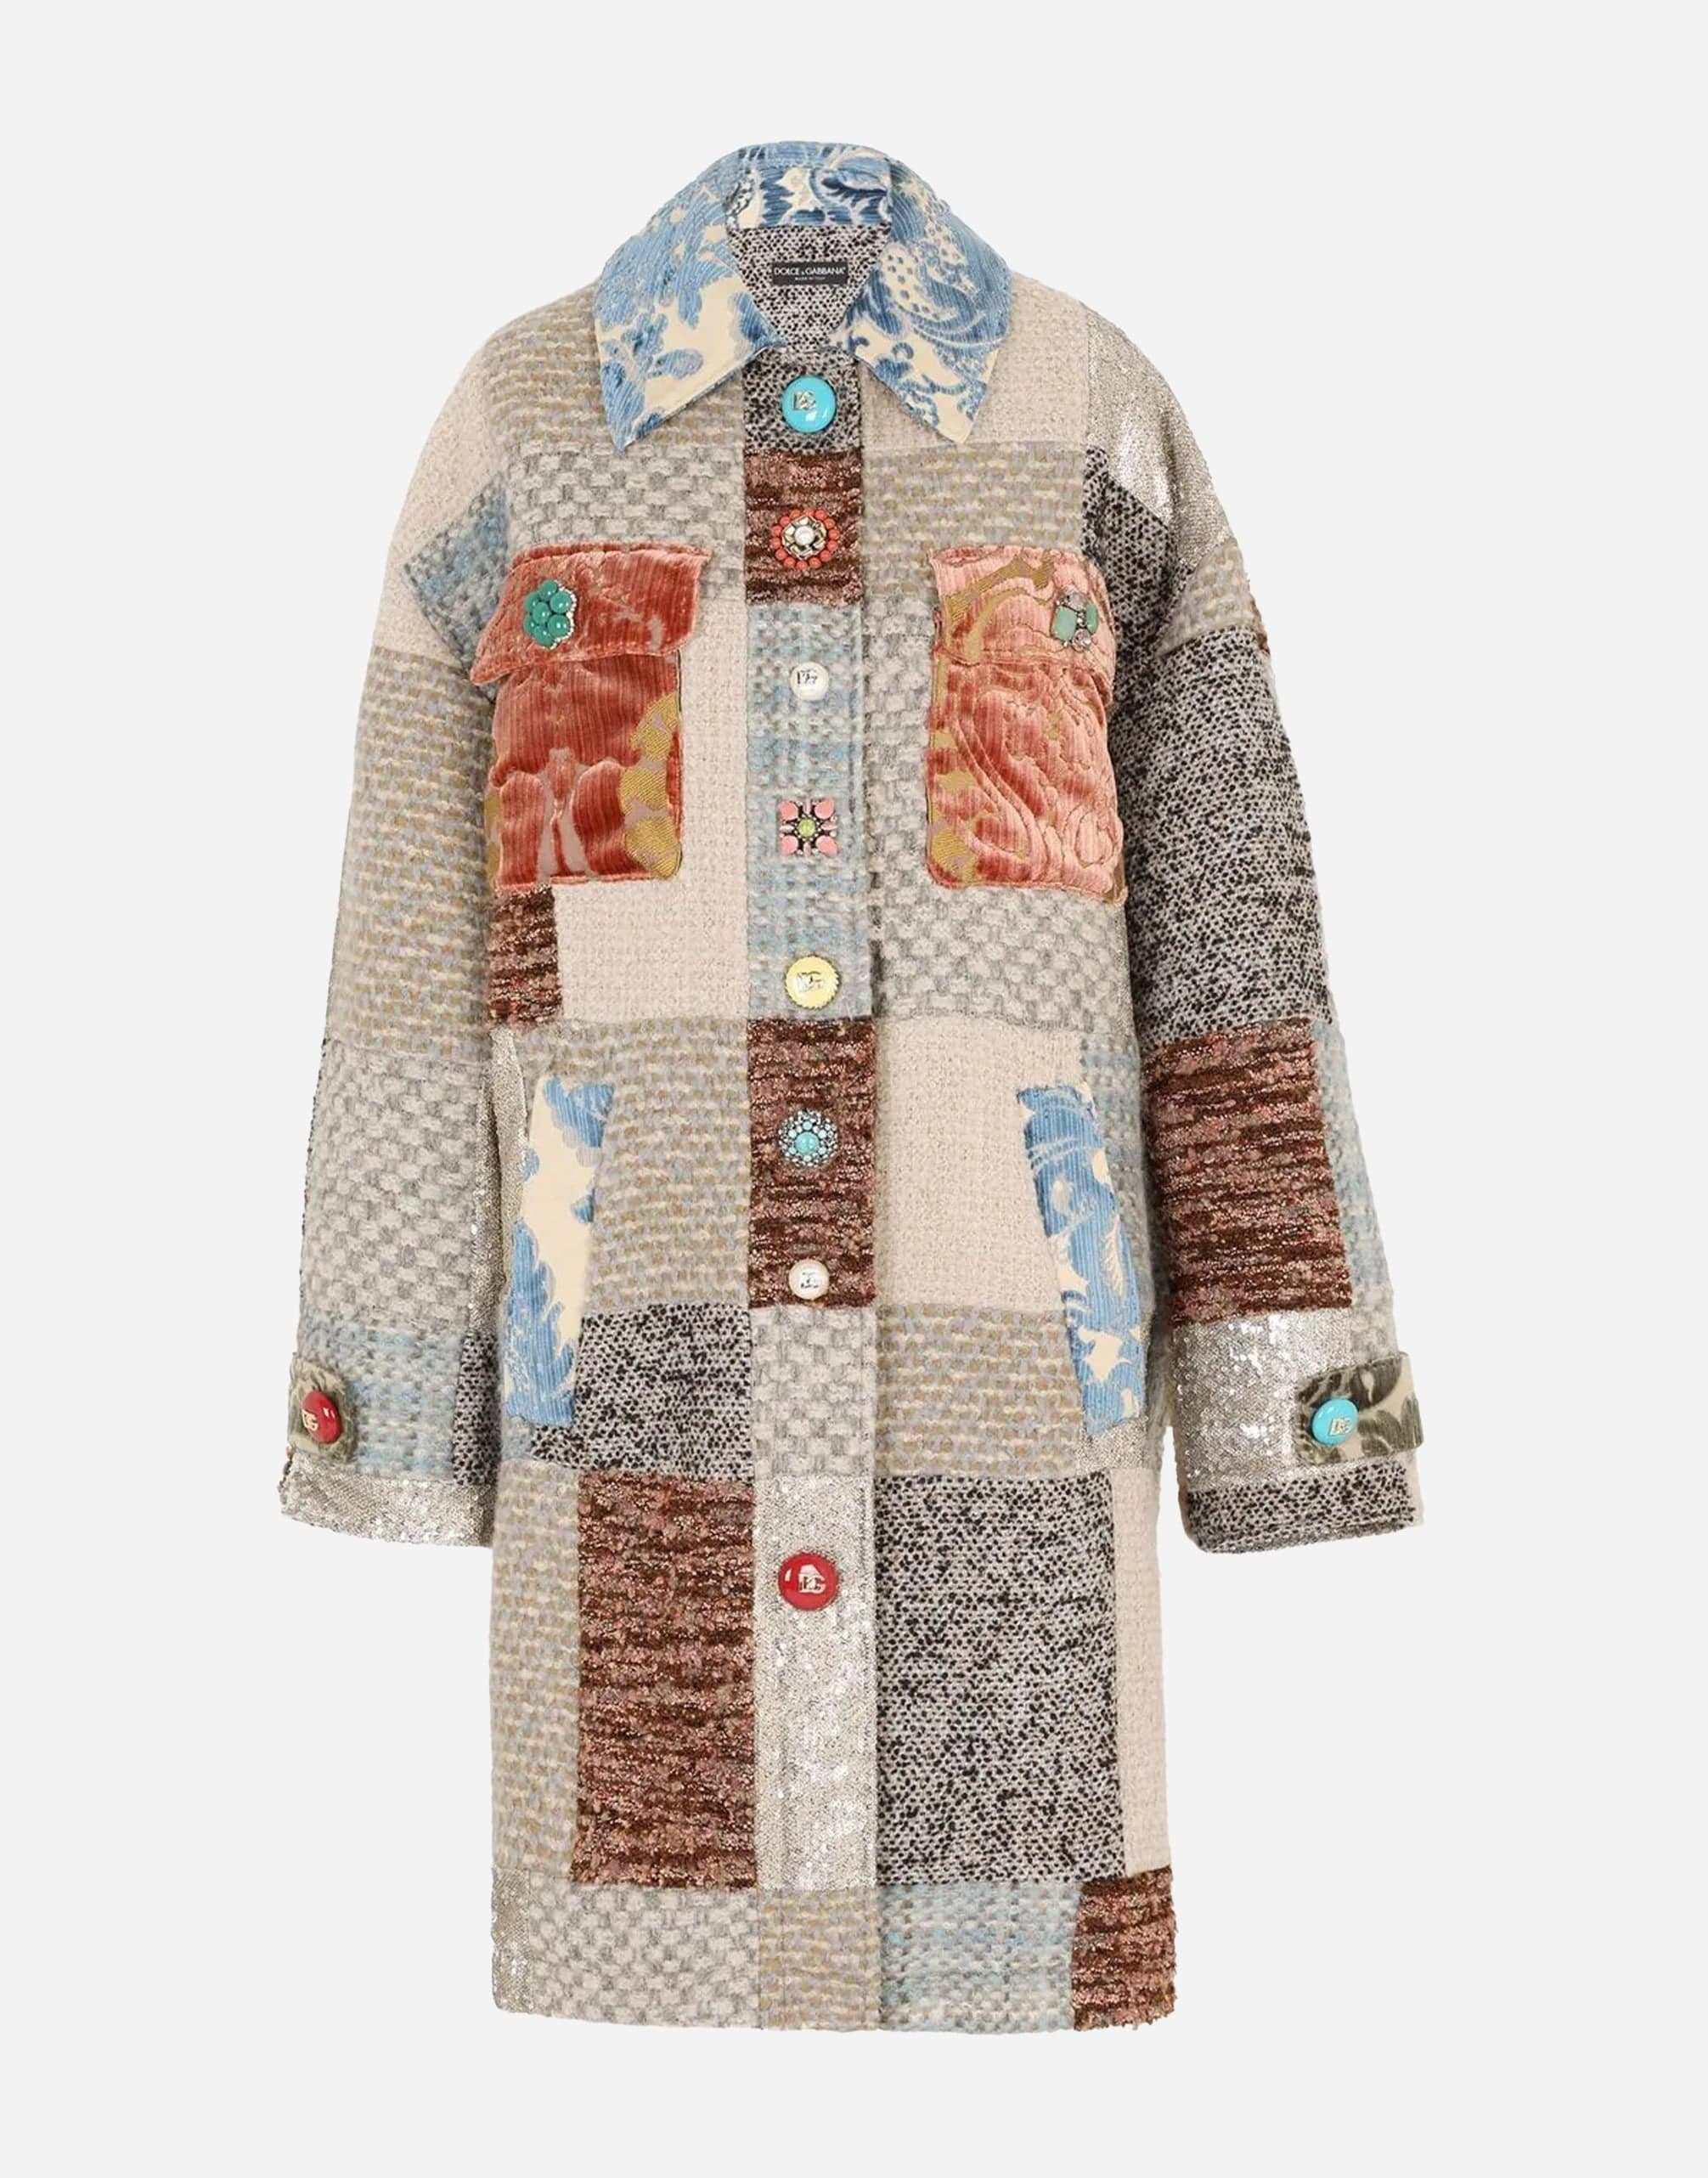 Dolce & Gabbana Patchwork Tweed Coat With Bejeweled Embellishment